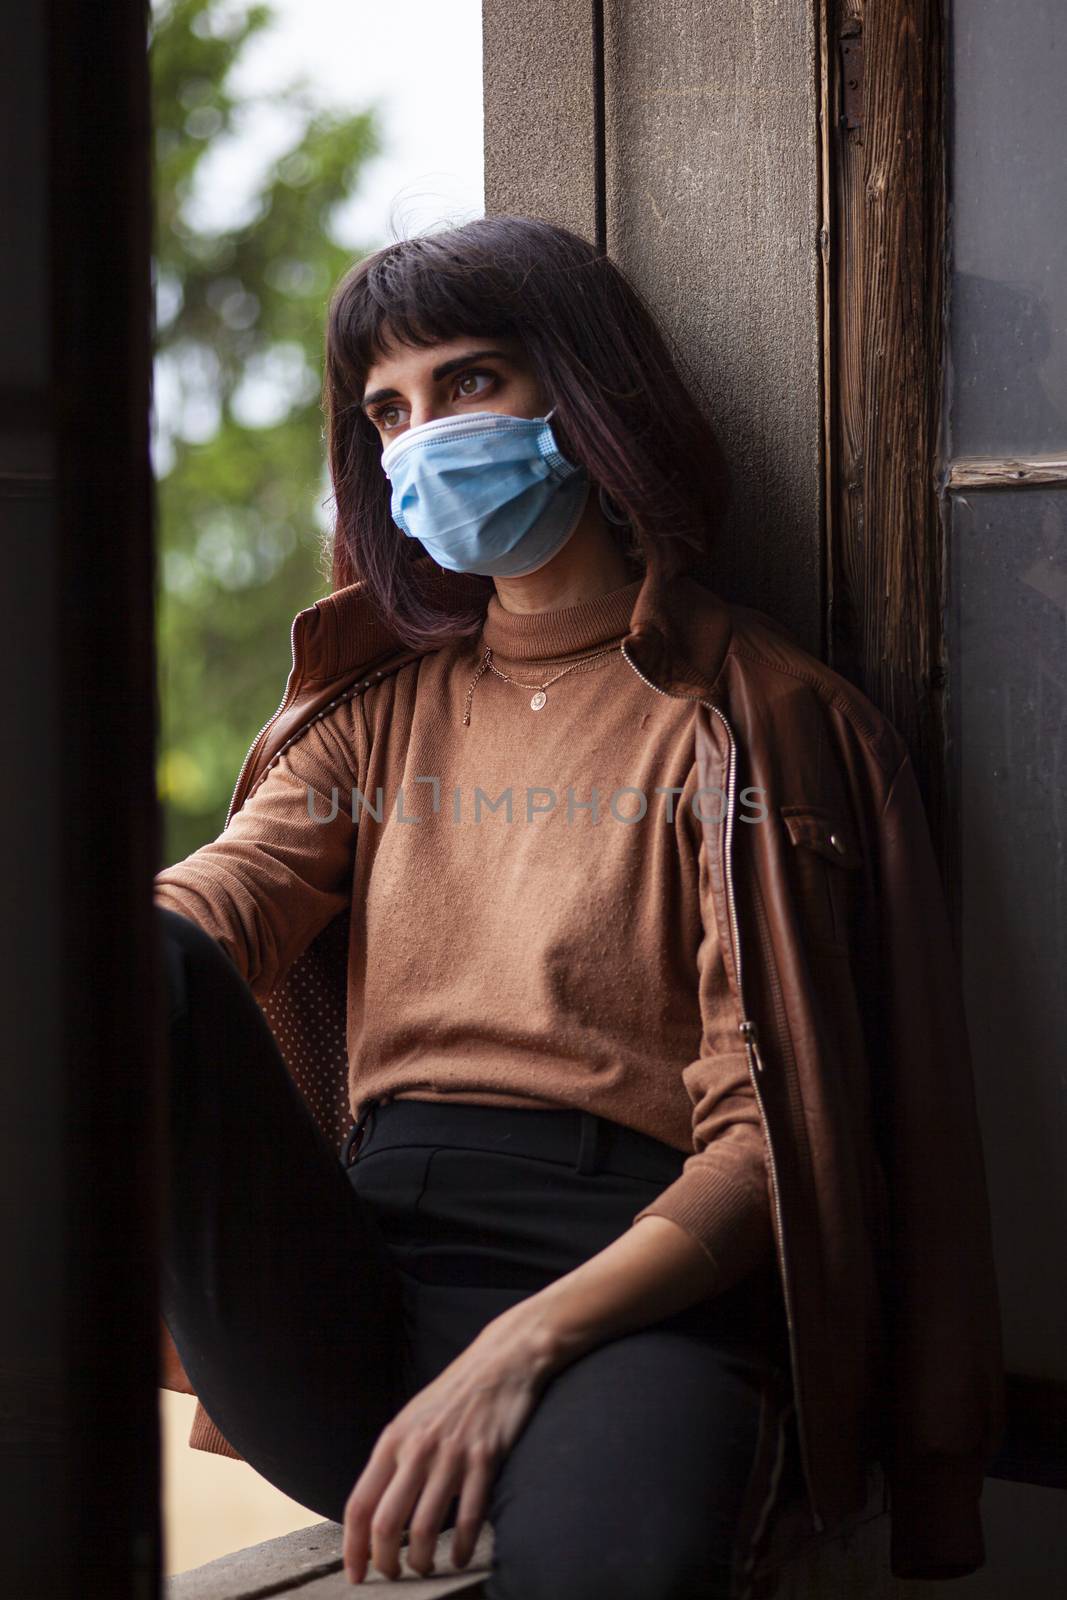 Girl with medical mask at window 12 by pippocarlot